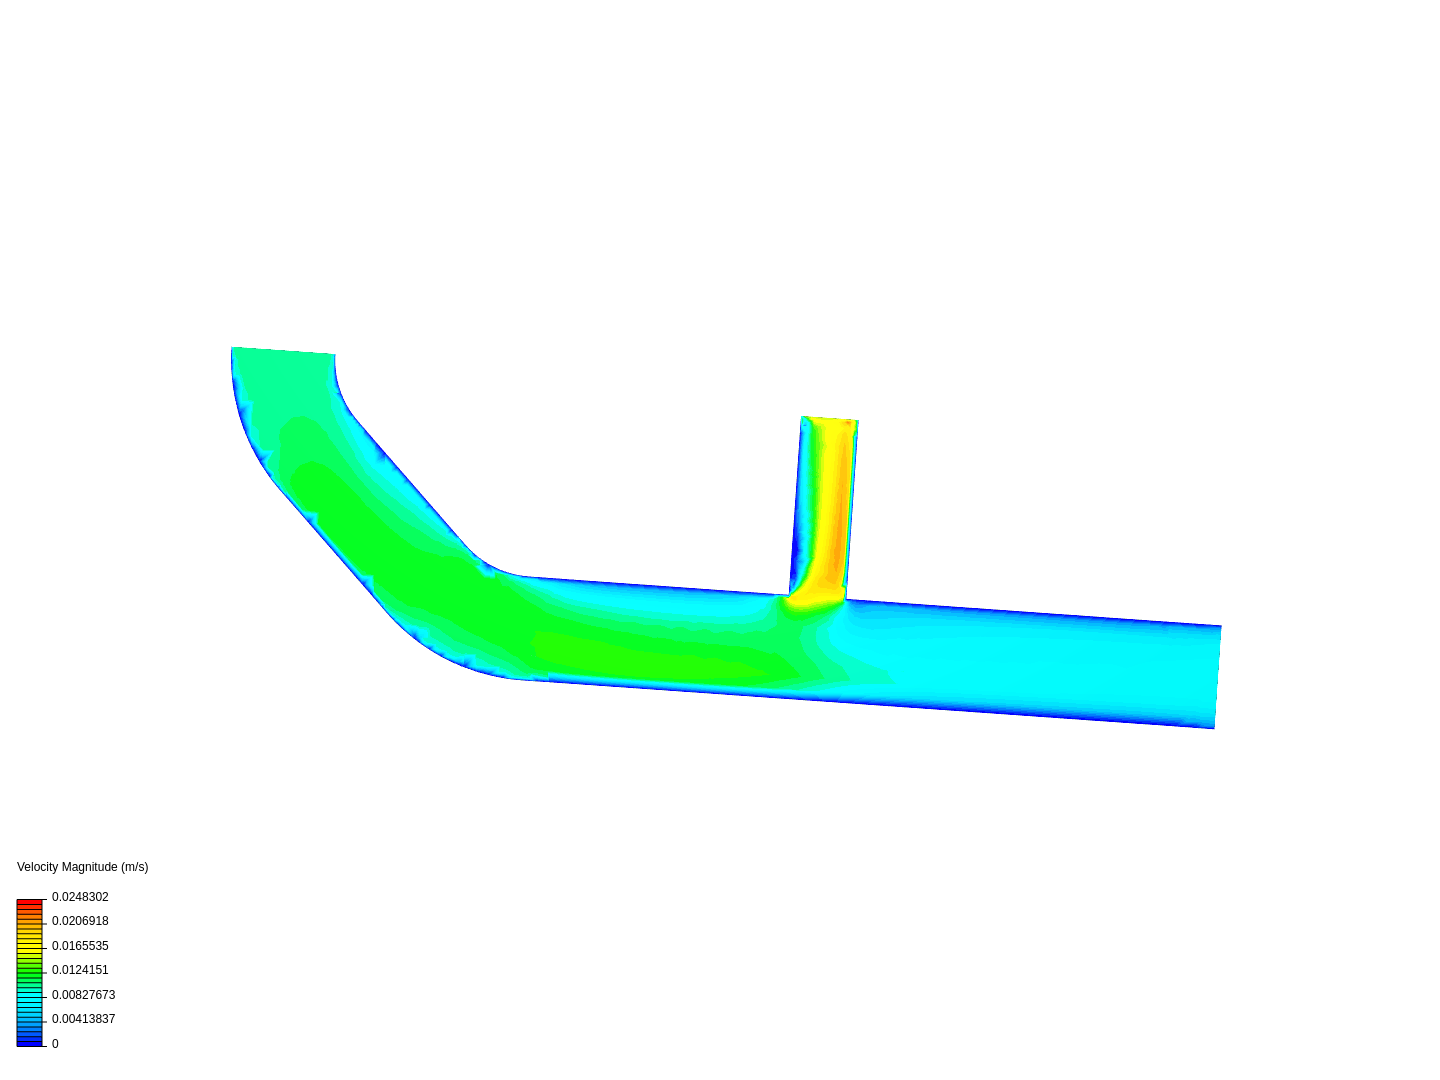 Flow through a pipe image